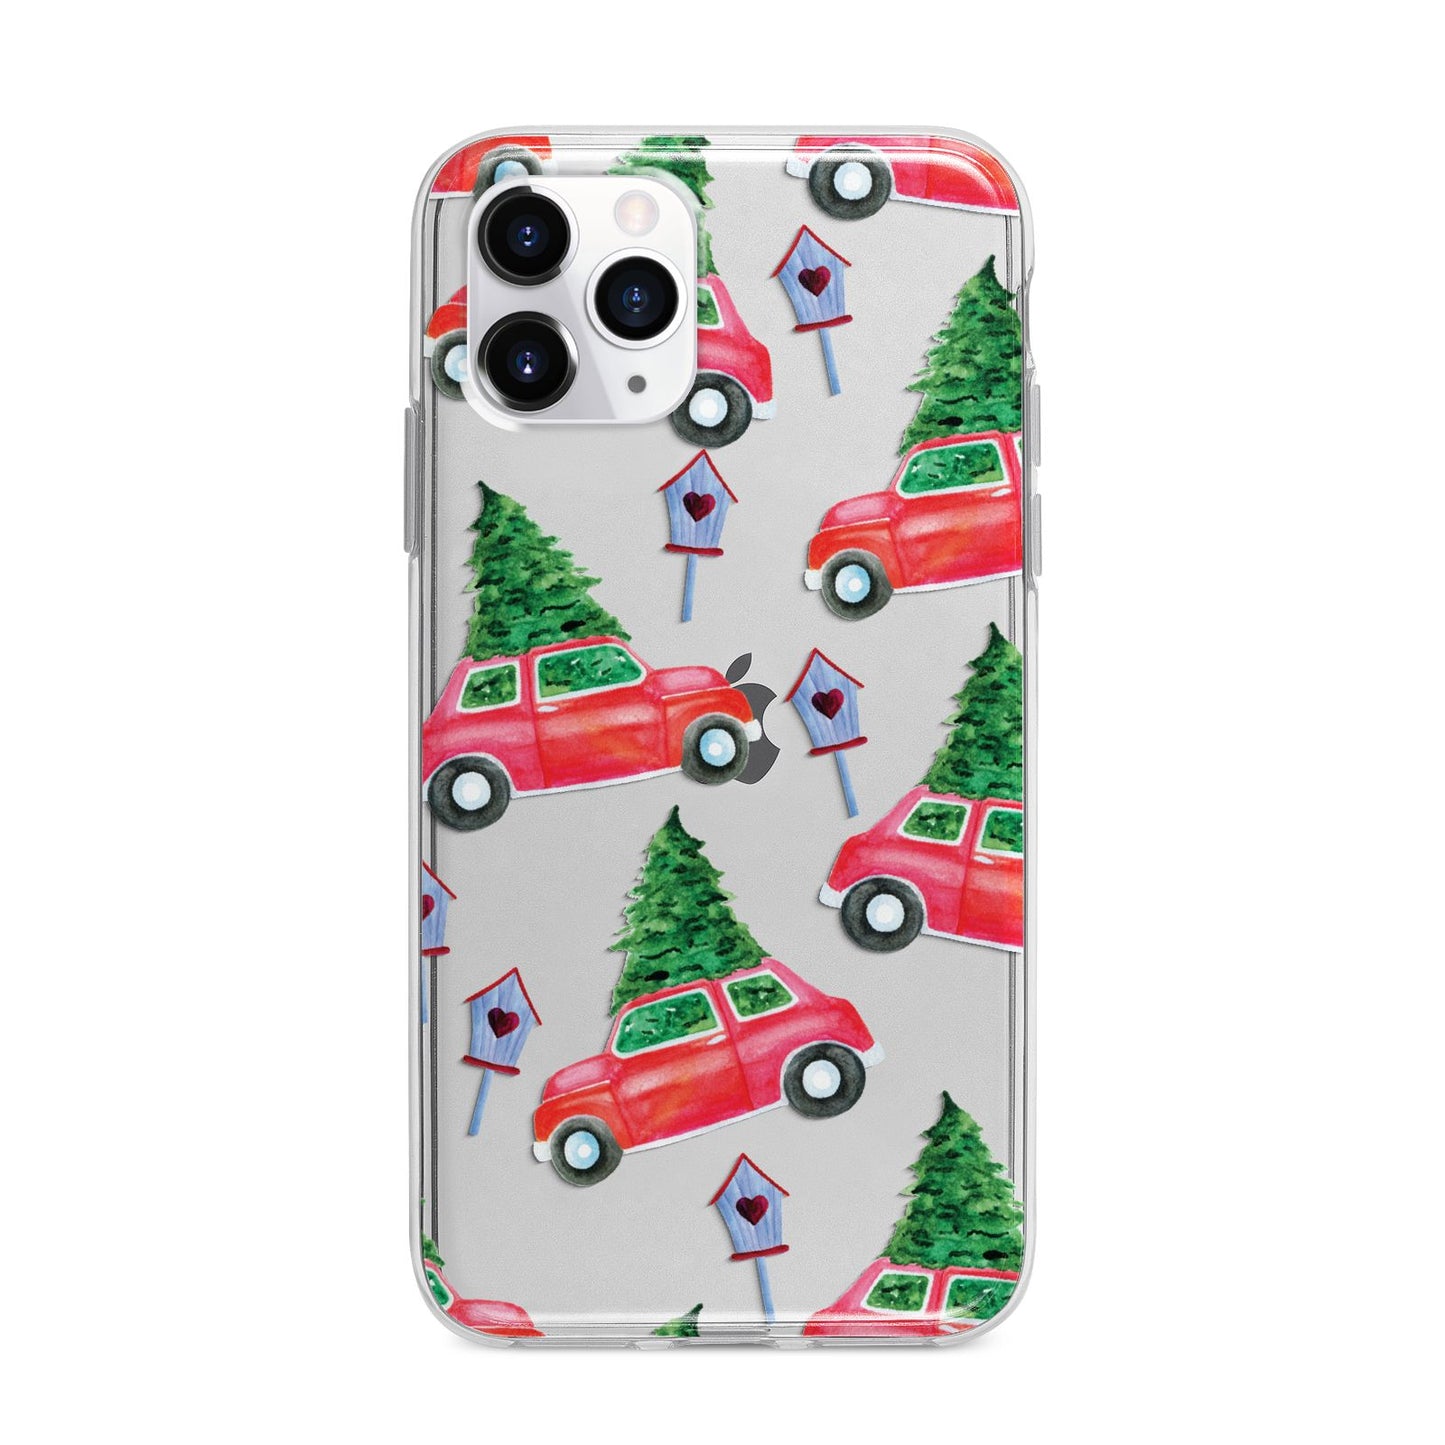 Driving home for Christmas Apple iPhone 11 Pro Max in Silver with Bumper Case